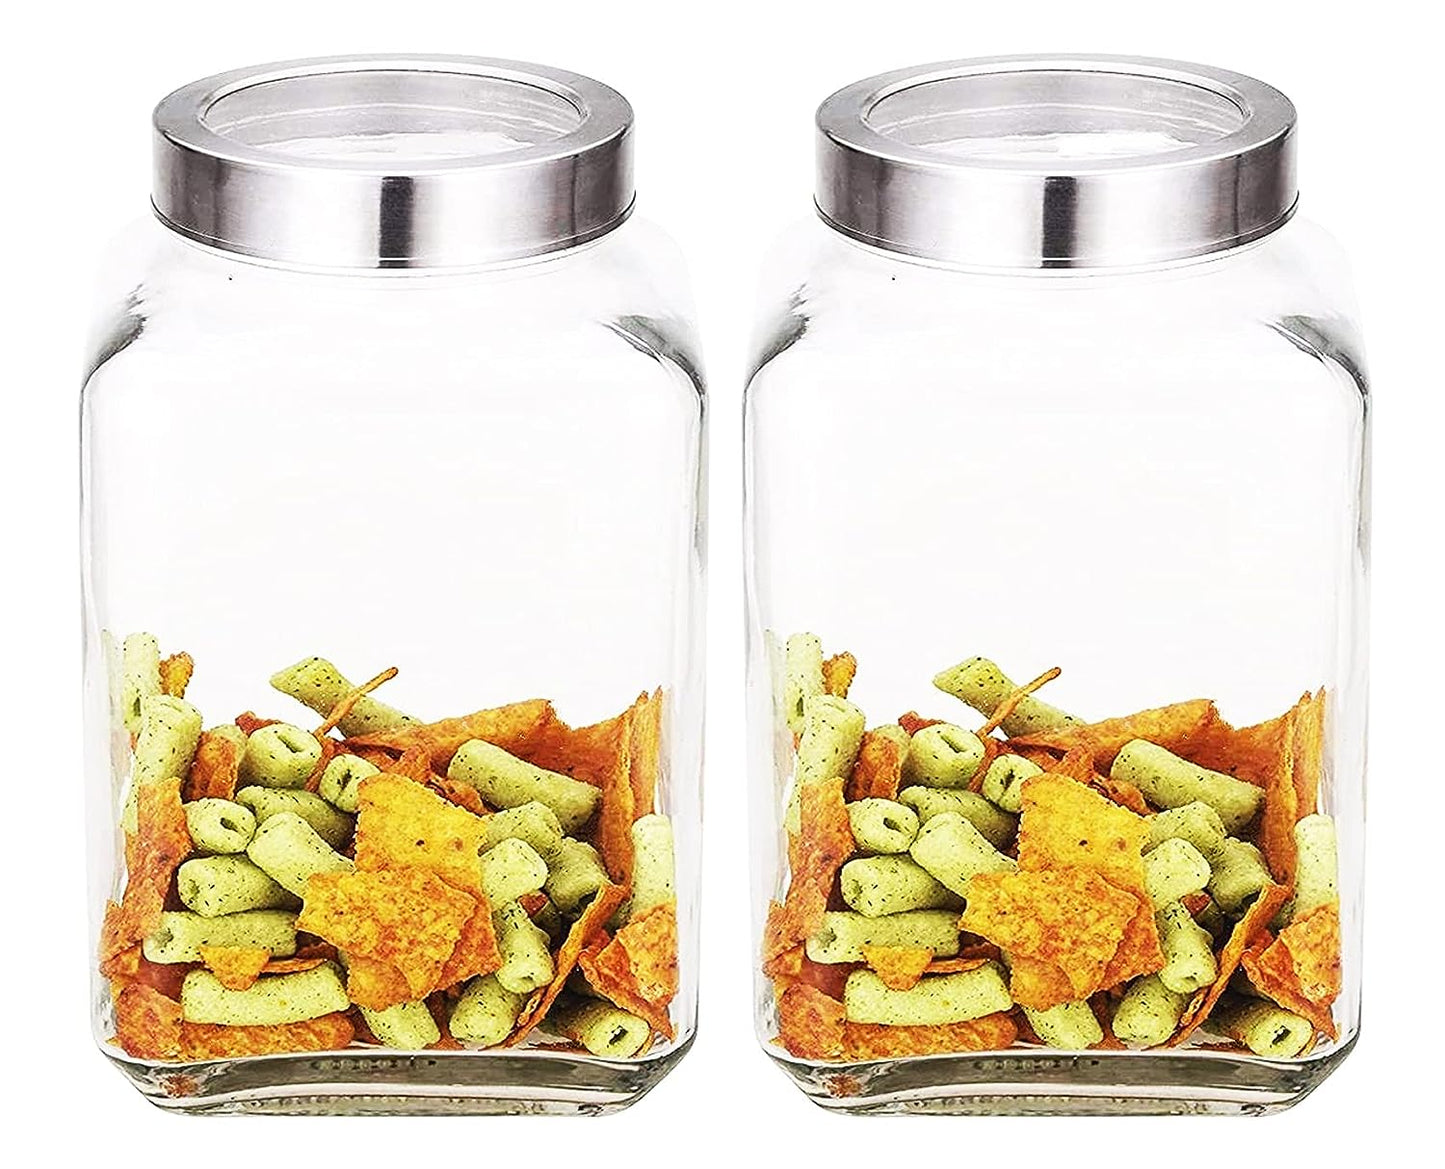 Machak Cubikal Big Kitchen Containers For Storage Glass Jar Set with Steel Cap, 3kg, Clear (2 Pc)